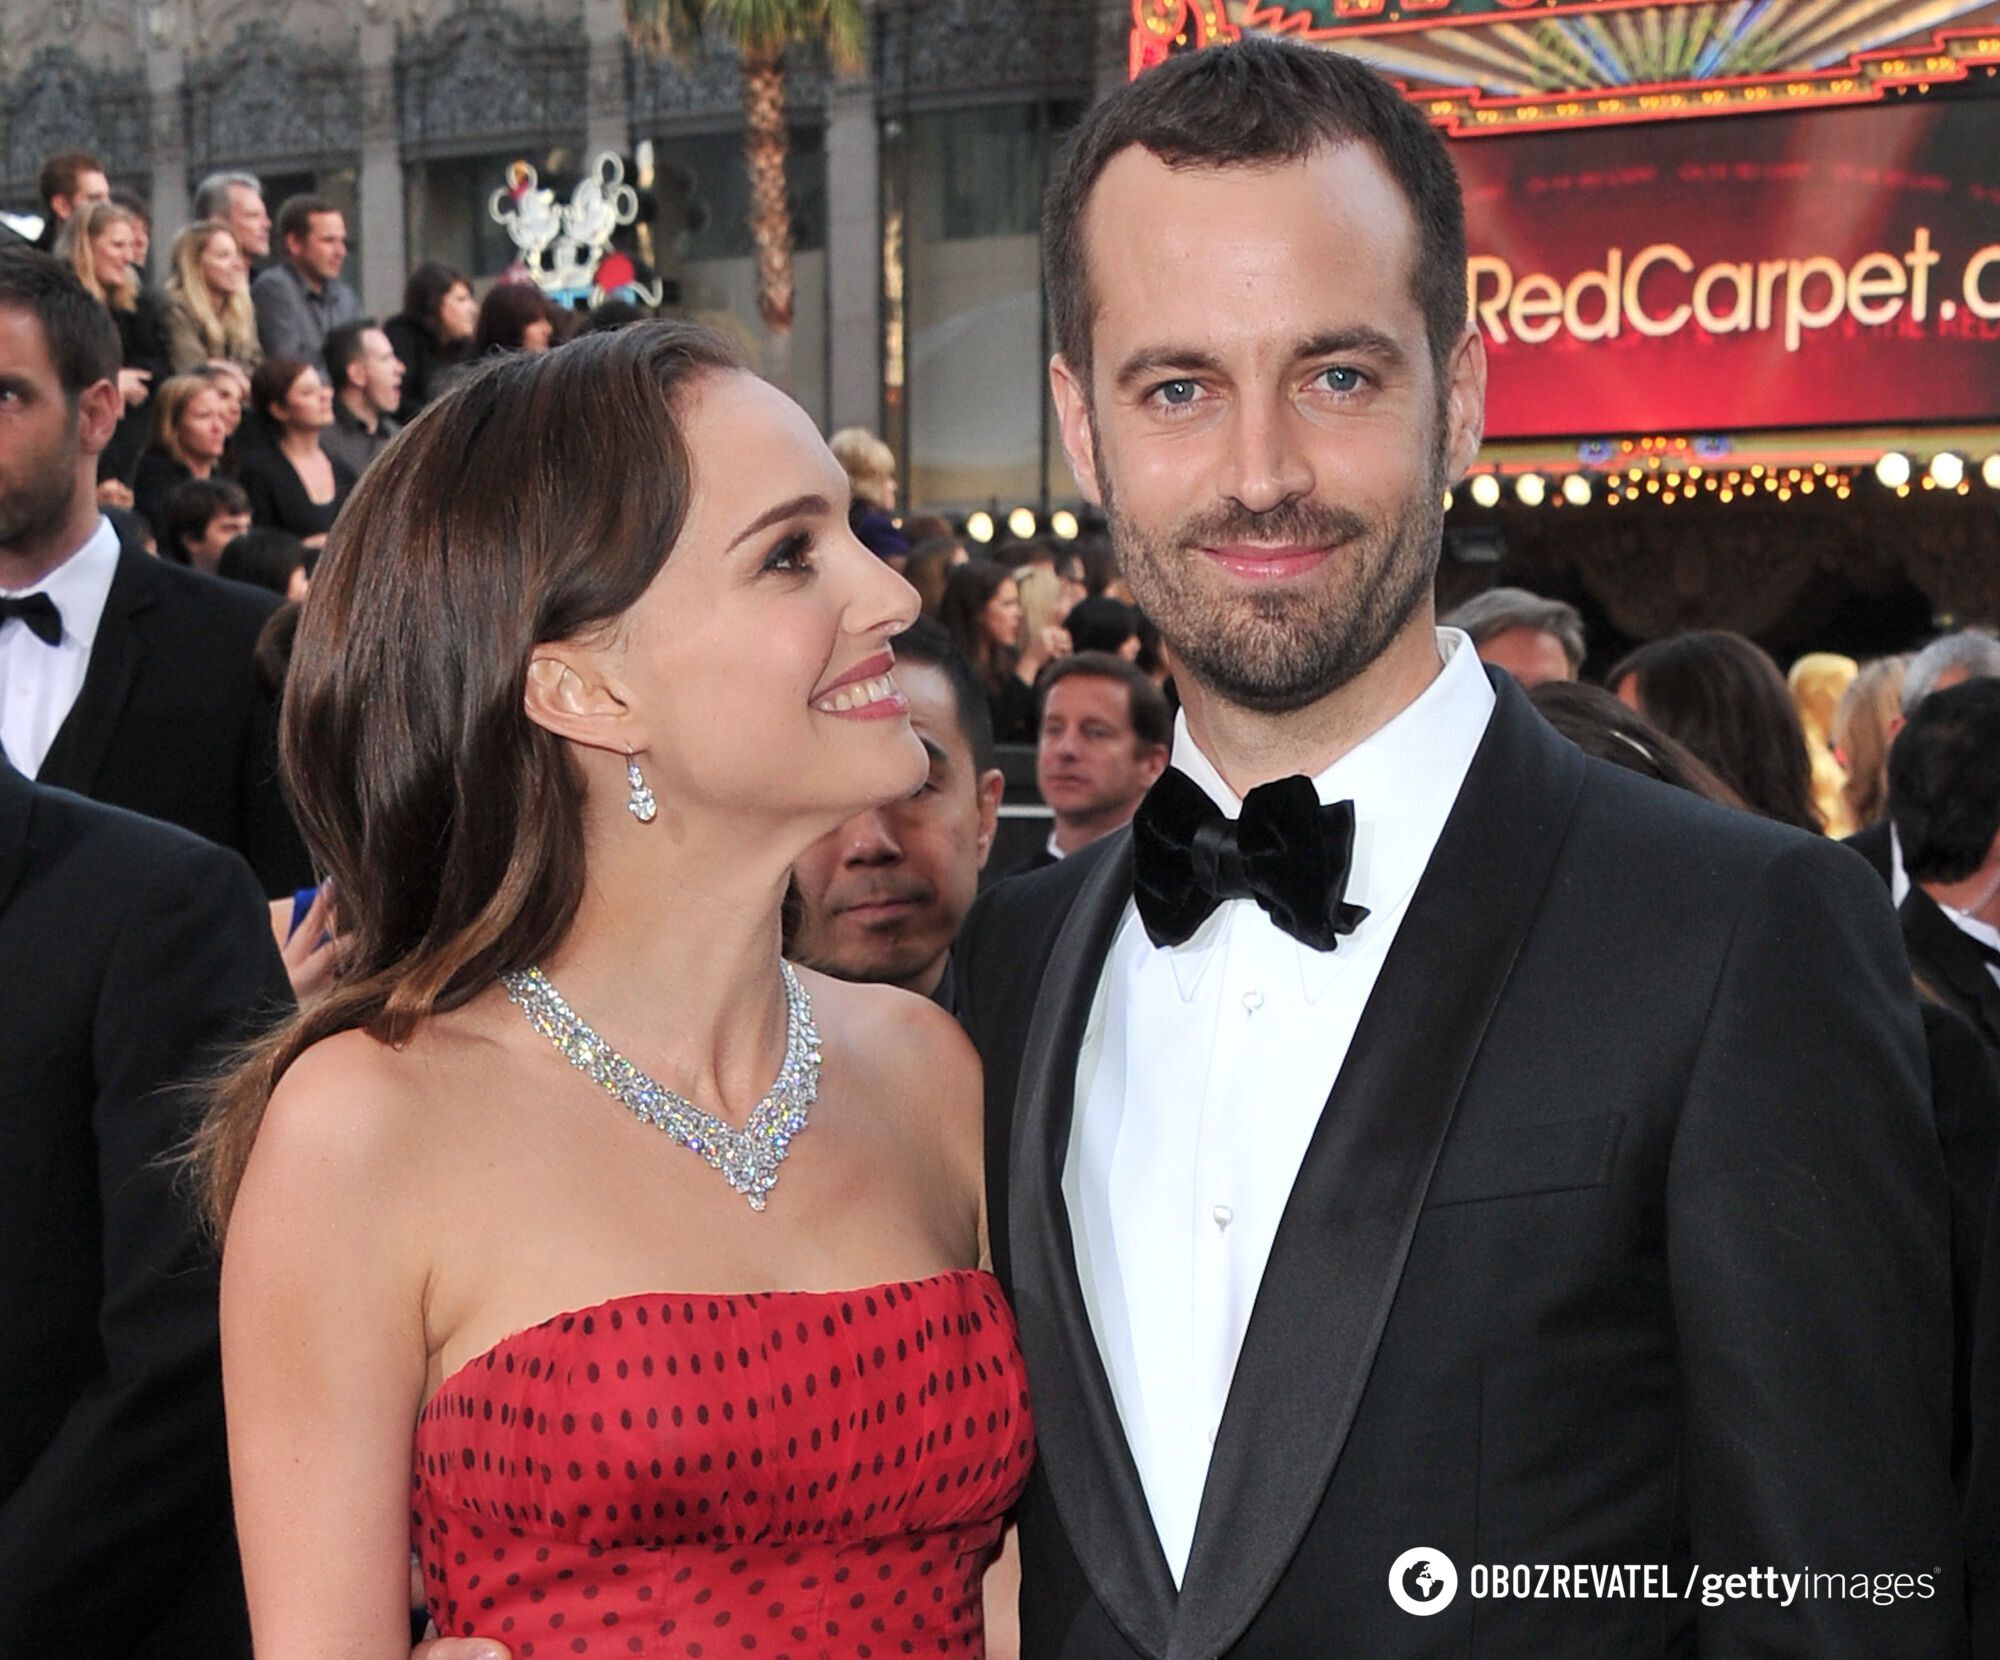 Natalie Portman separates from her husband after 11 years of marriage: the reason was infidelity